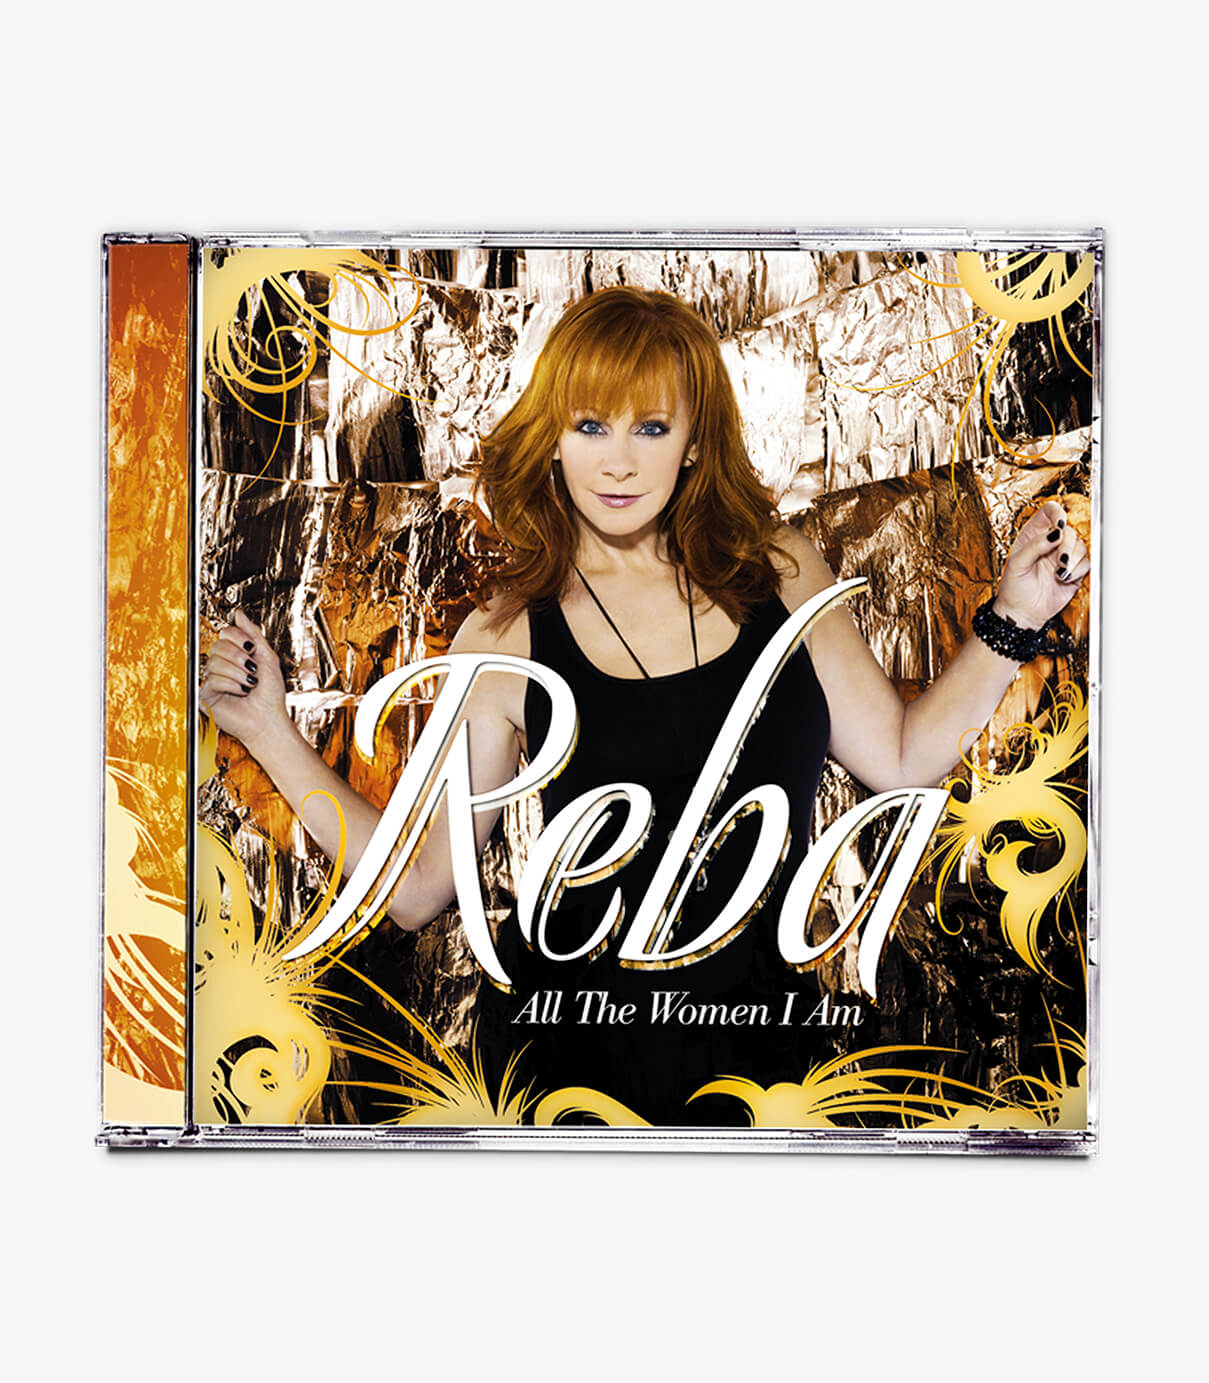 Image of album cover packaging for All The Woman I Am deluxe CD by Reba McEntire for Starstruck Management Group in Nashville, Tennessee